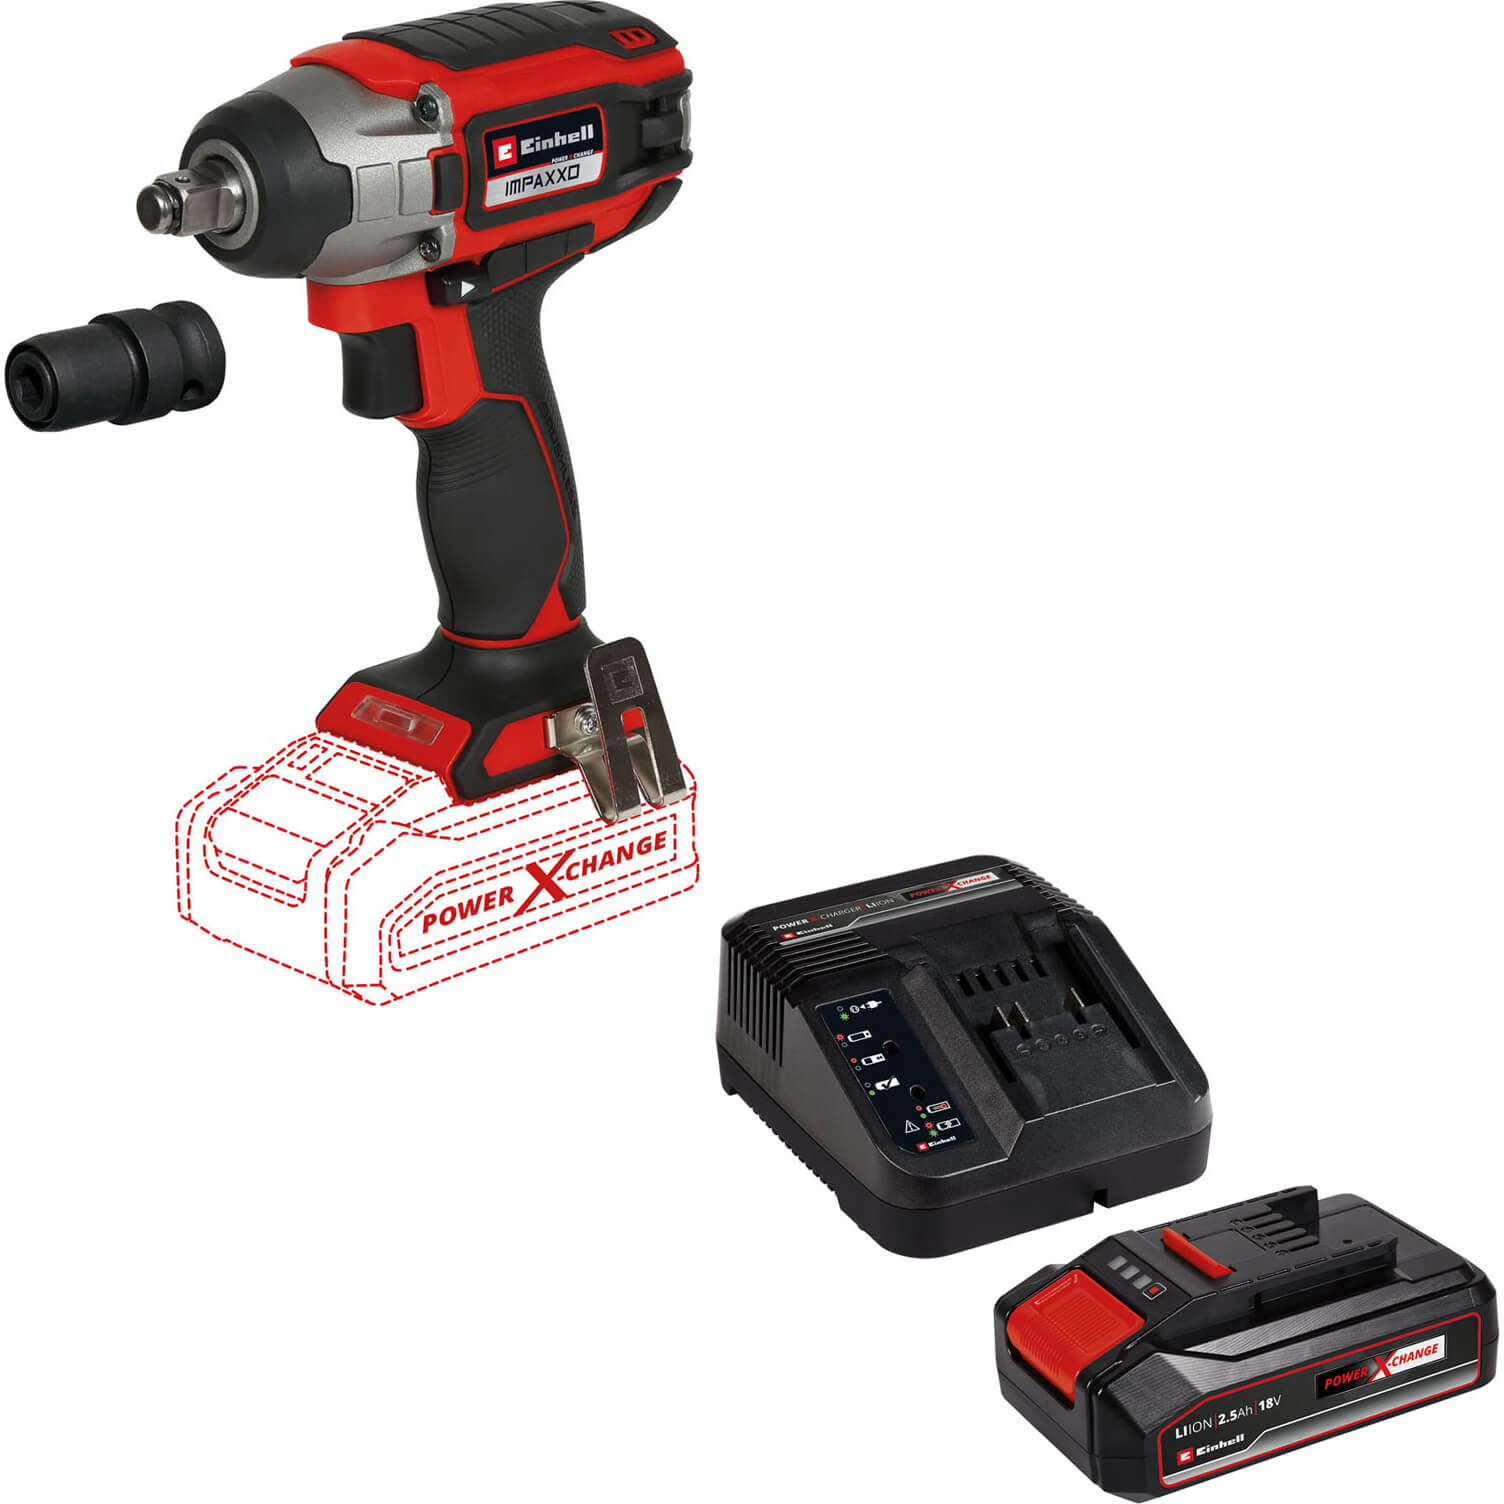 Image of Einhell IMPAXXO 18/230 18v Cordless Brushless 1/2" Impact Wrench 1 x 2.5ah Li-ion Charger No Case